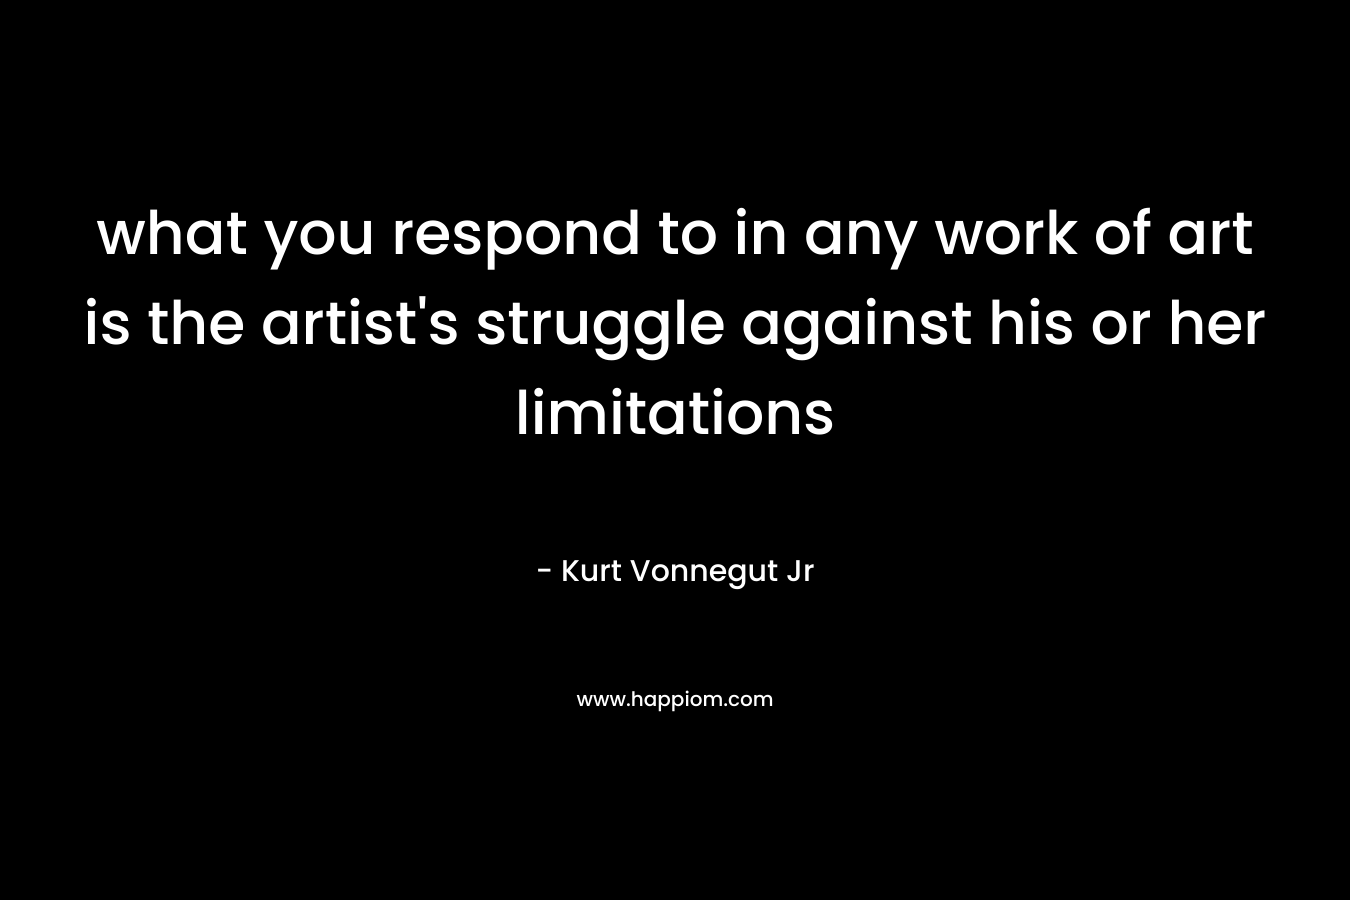 what you respond to in any work of art is the artist's struggle against his or her limitations